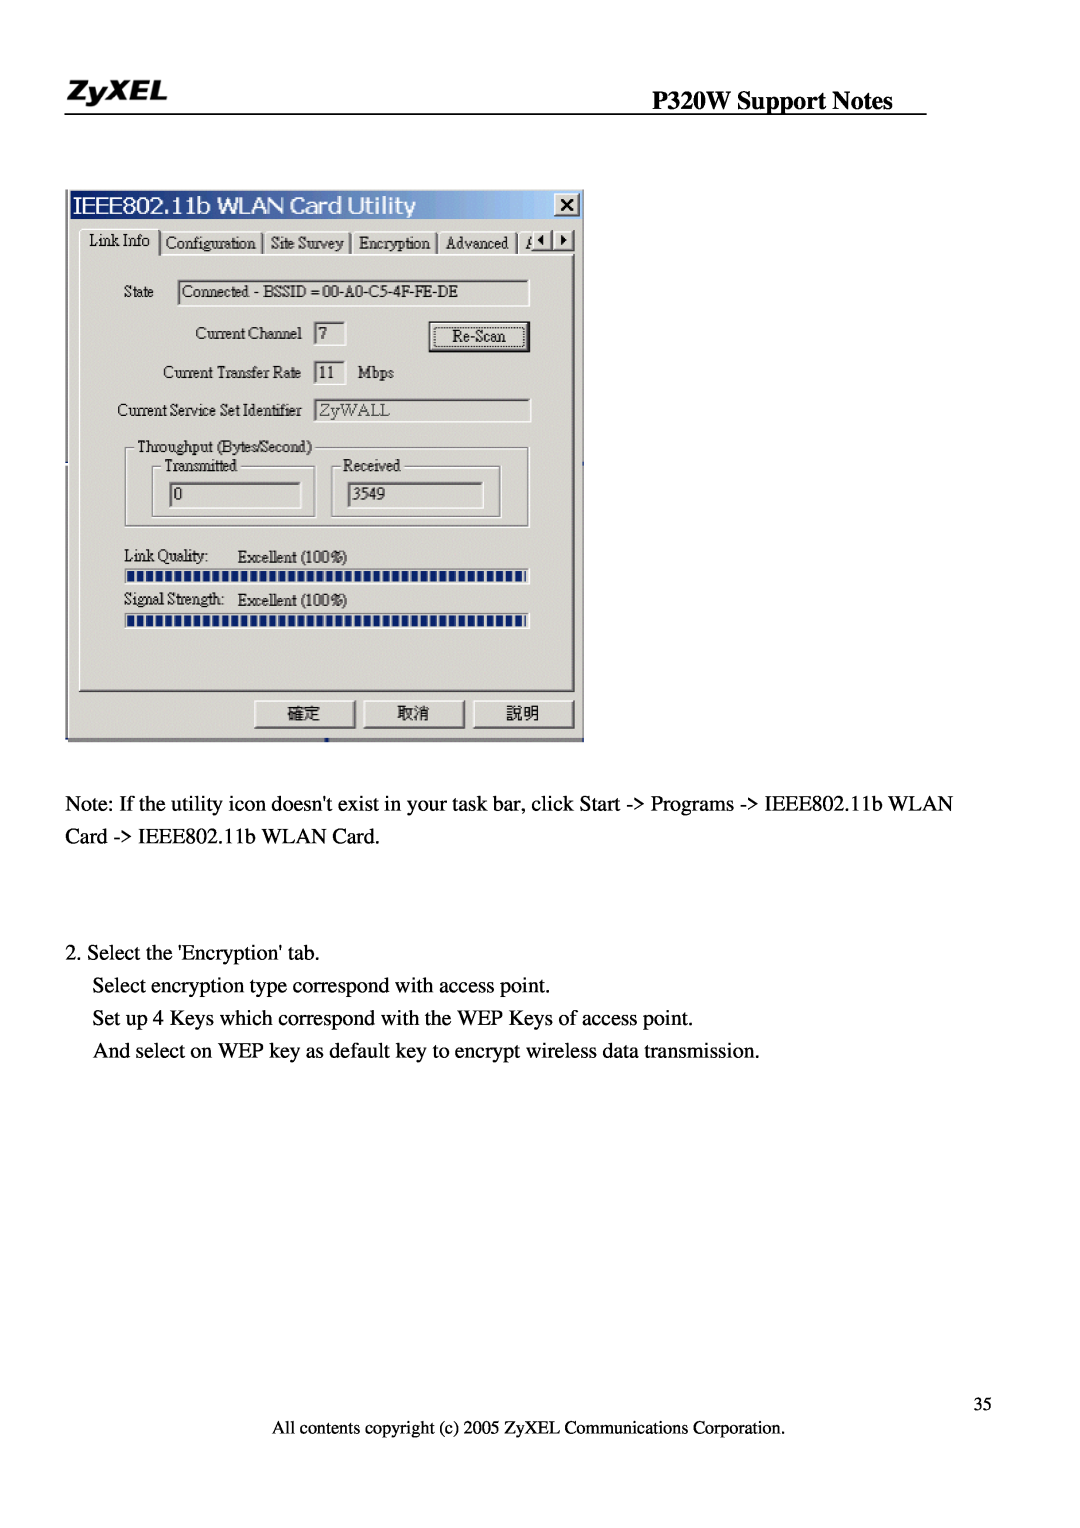 ZyXEL Communications manual P320W Support Notes, Select the Encryption tab 